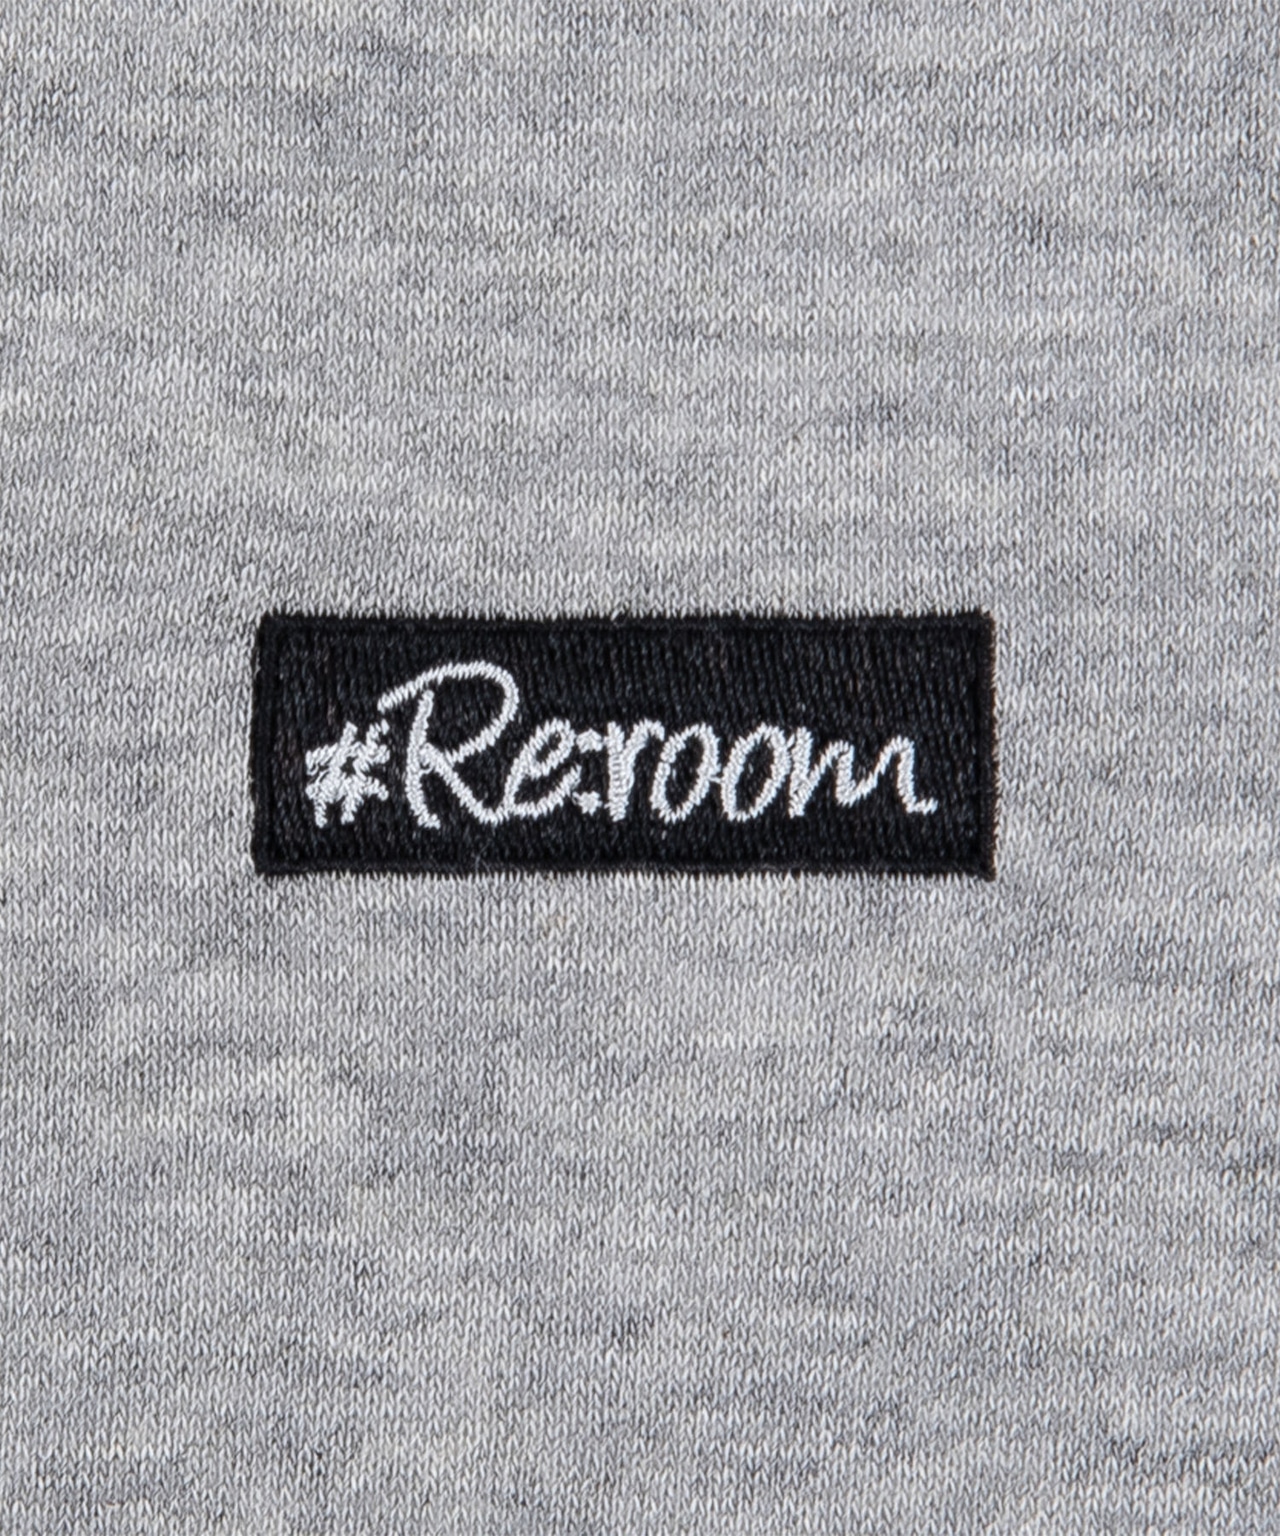 【#Re:room】SMALL BOX LOGO EMBROIDERY TRAINER［REC738］